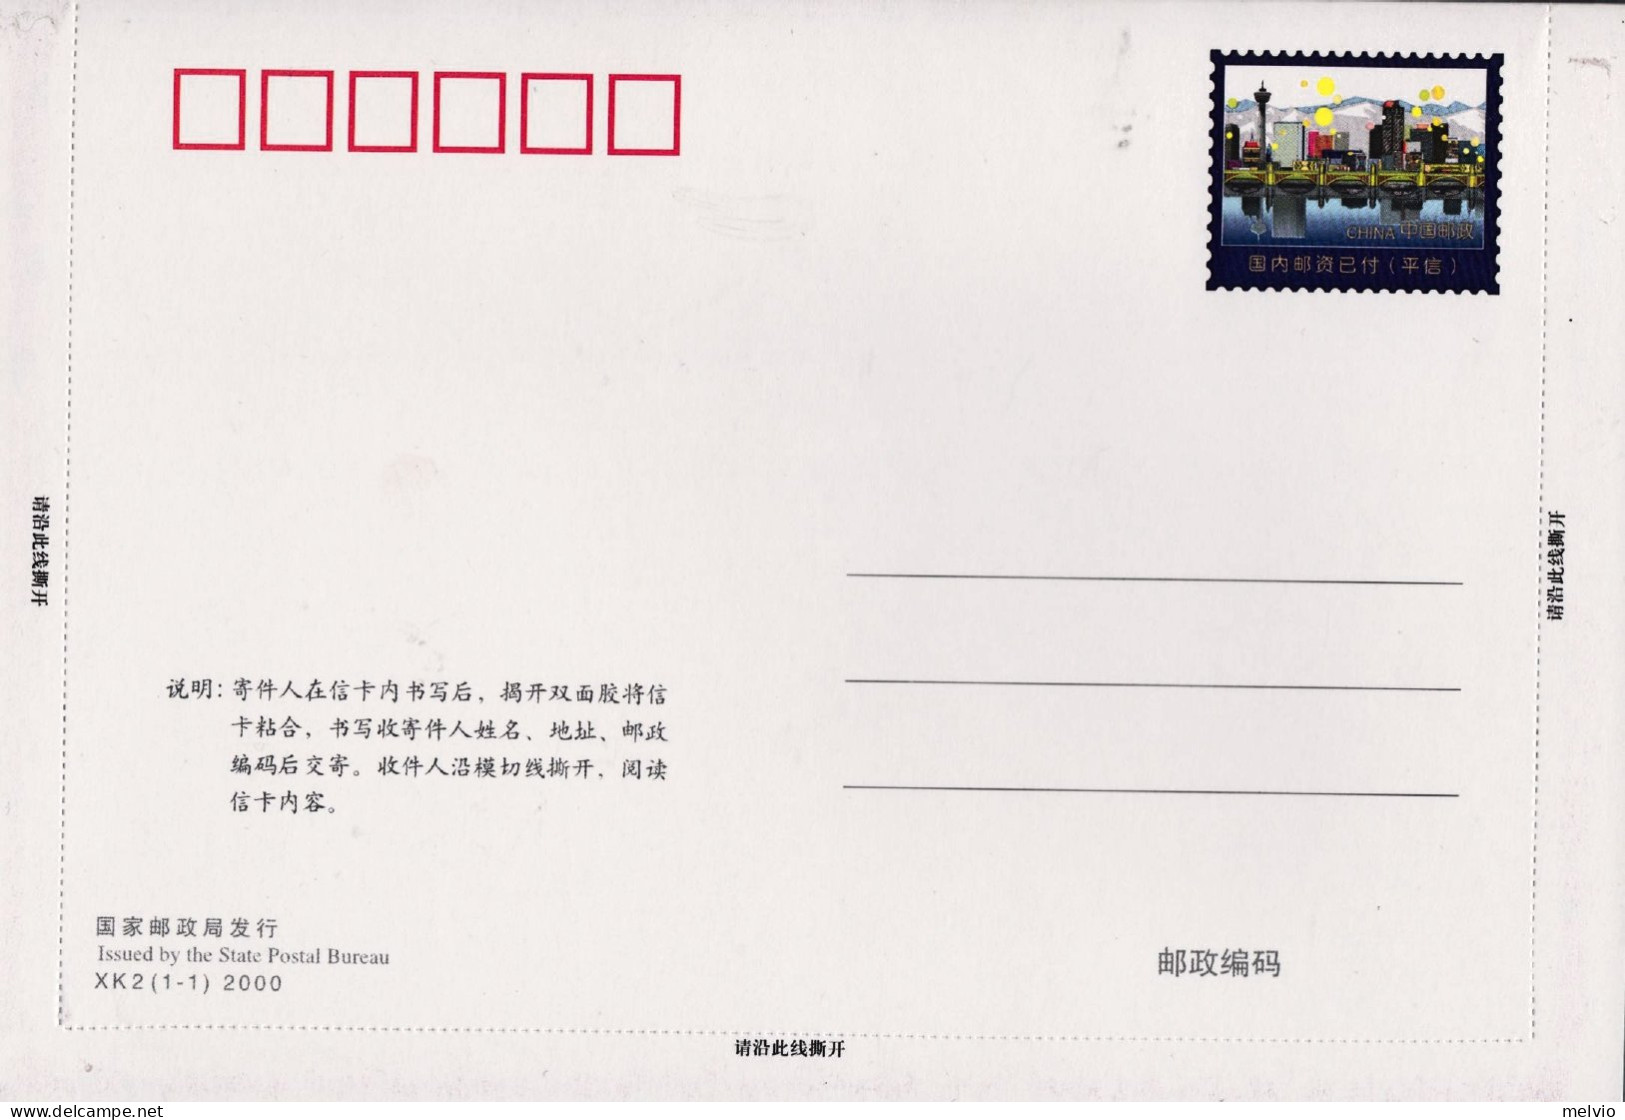 2000-Cina China XK2 (1-1) Happy New Year Lettersheet - Covers & Documents